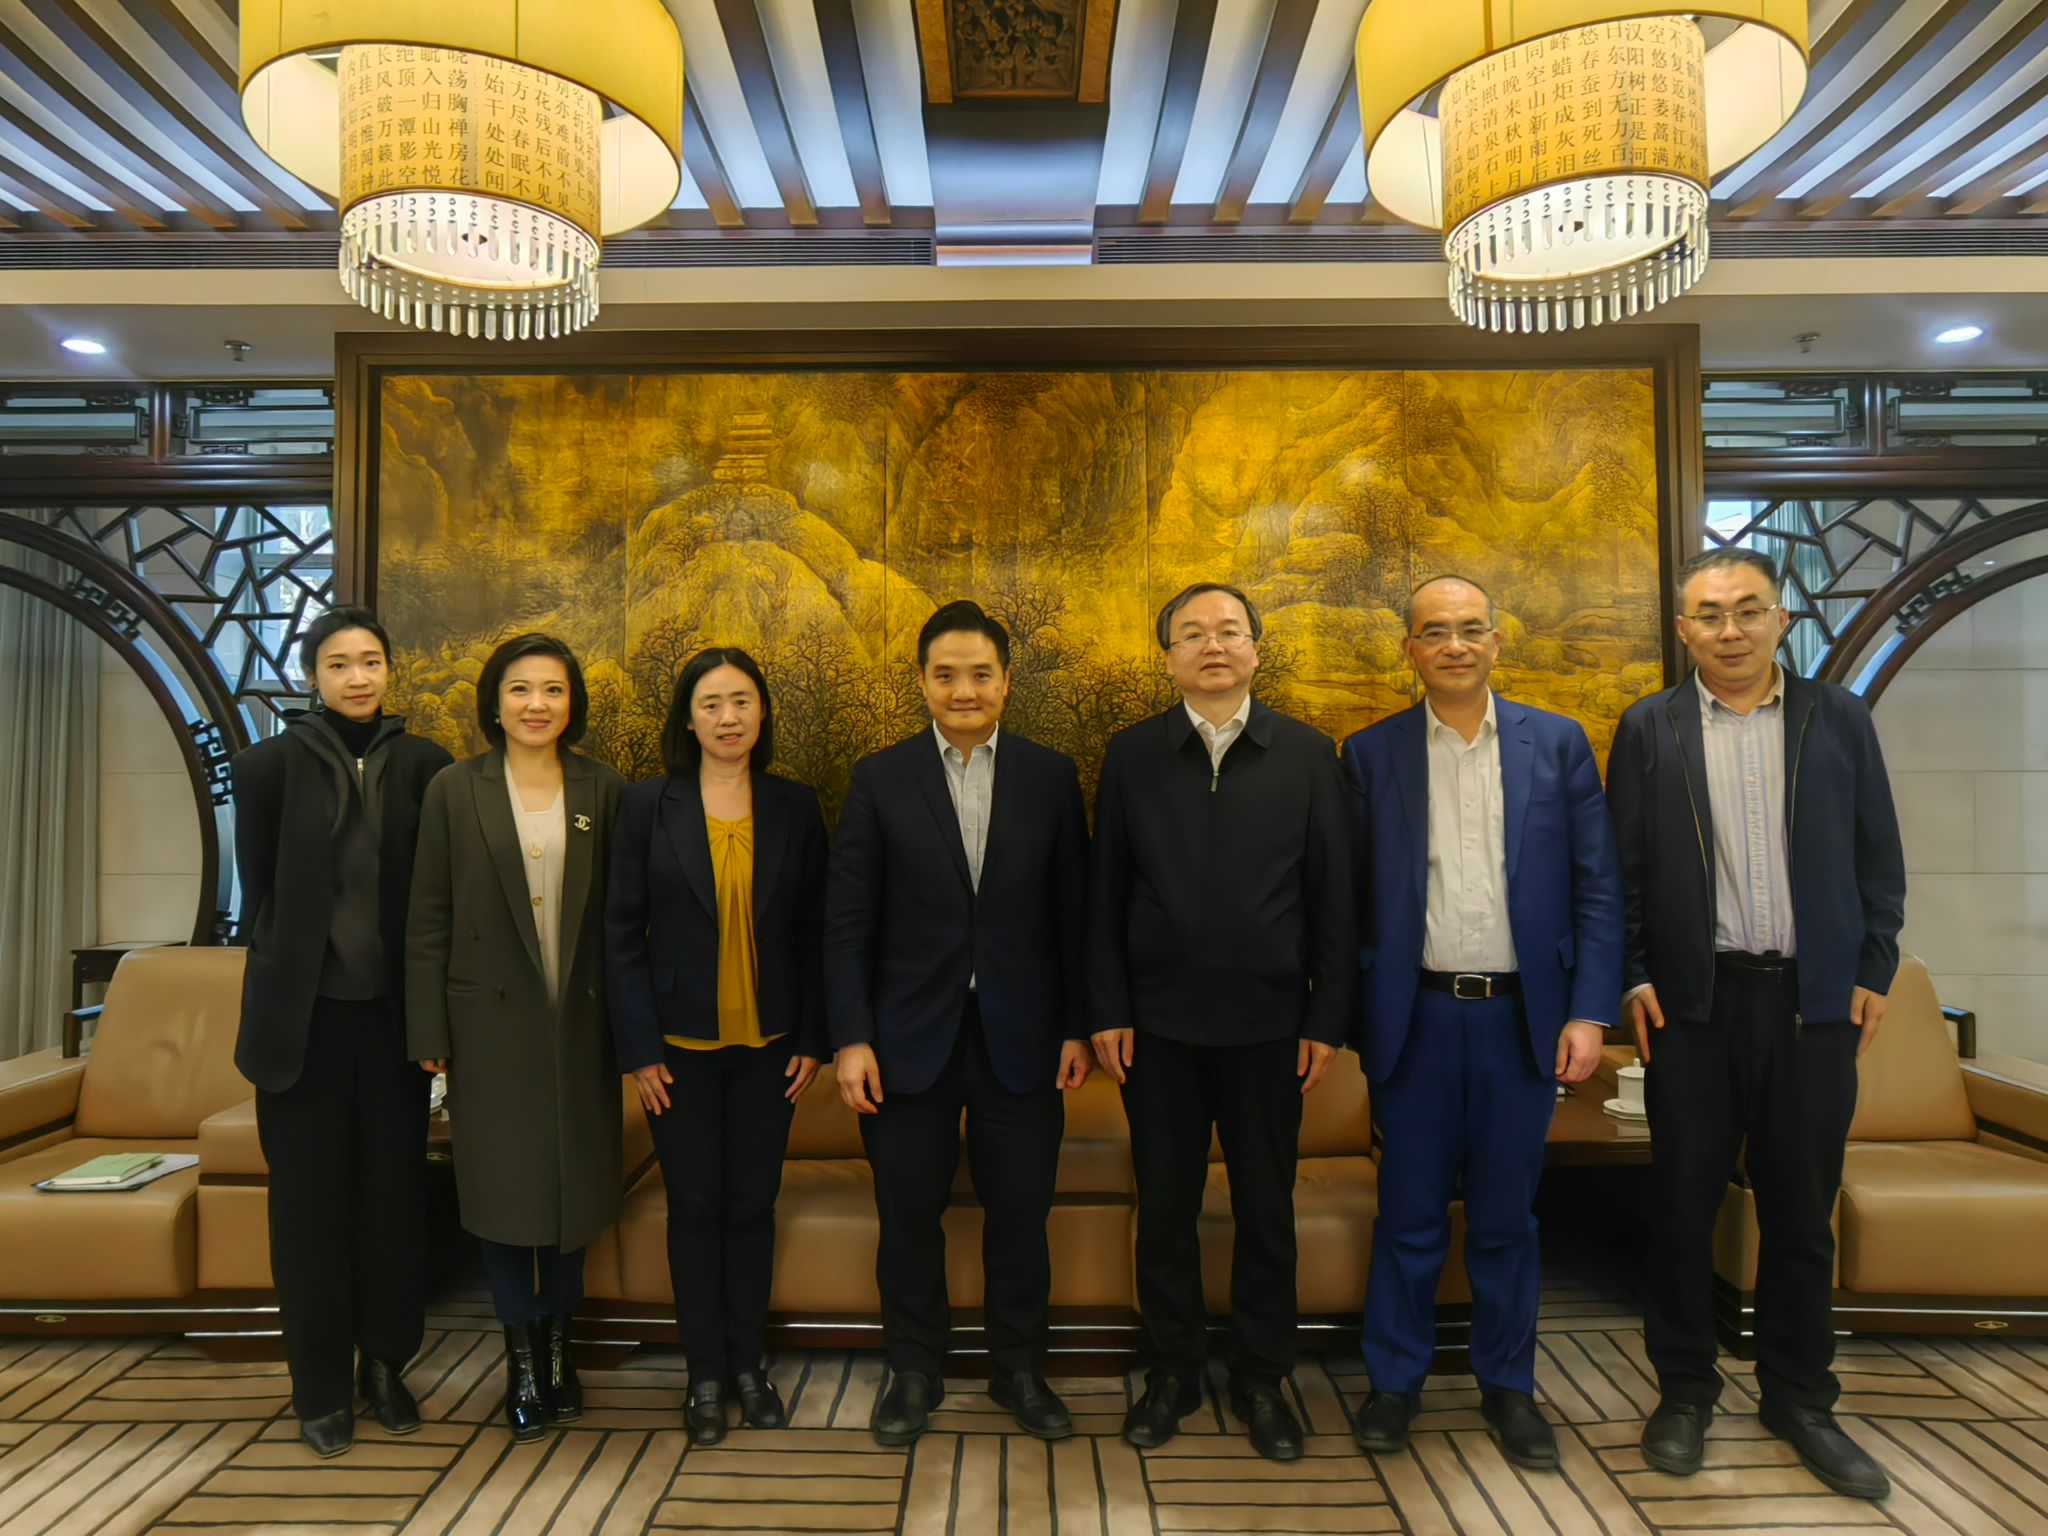 Dr Stephen Wong, Head of the CEPU, Dr Wang Chunxin, Deputy Head of the CEPU, and research colleagues visited the Ministry of Education.